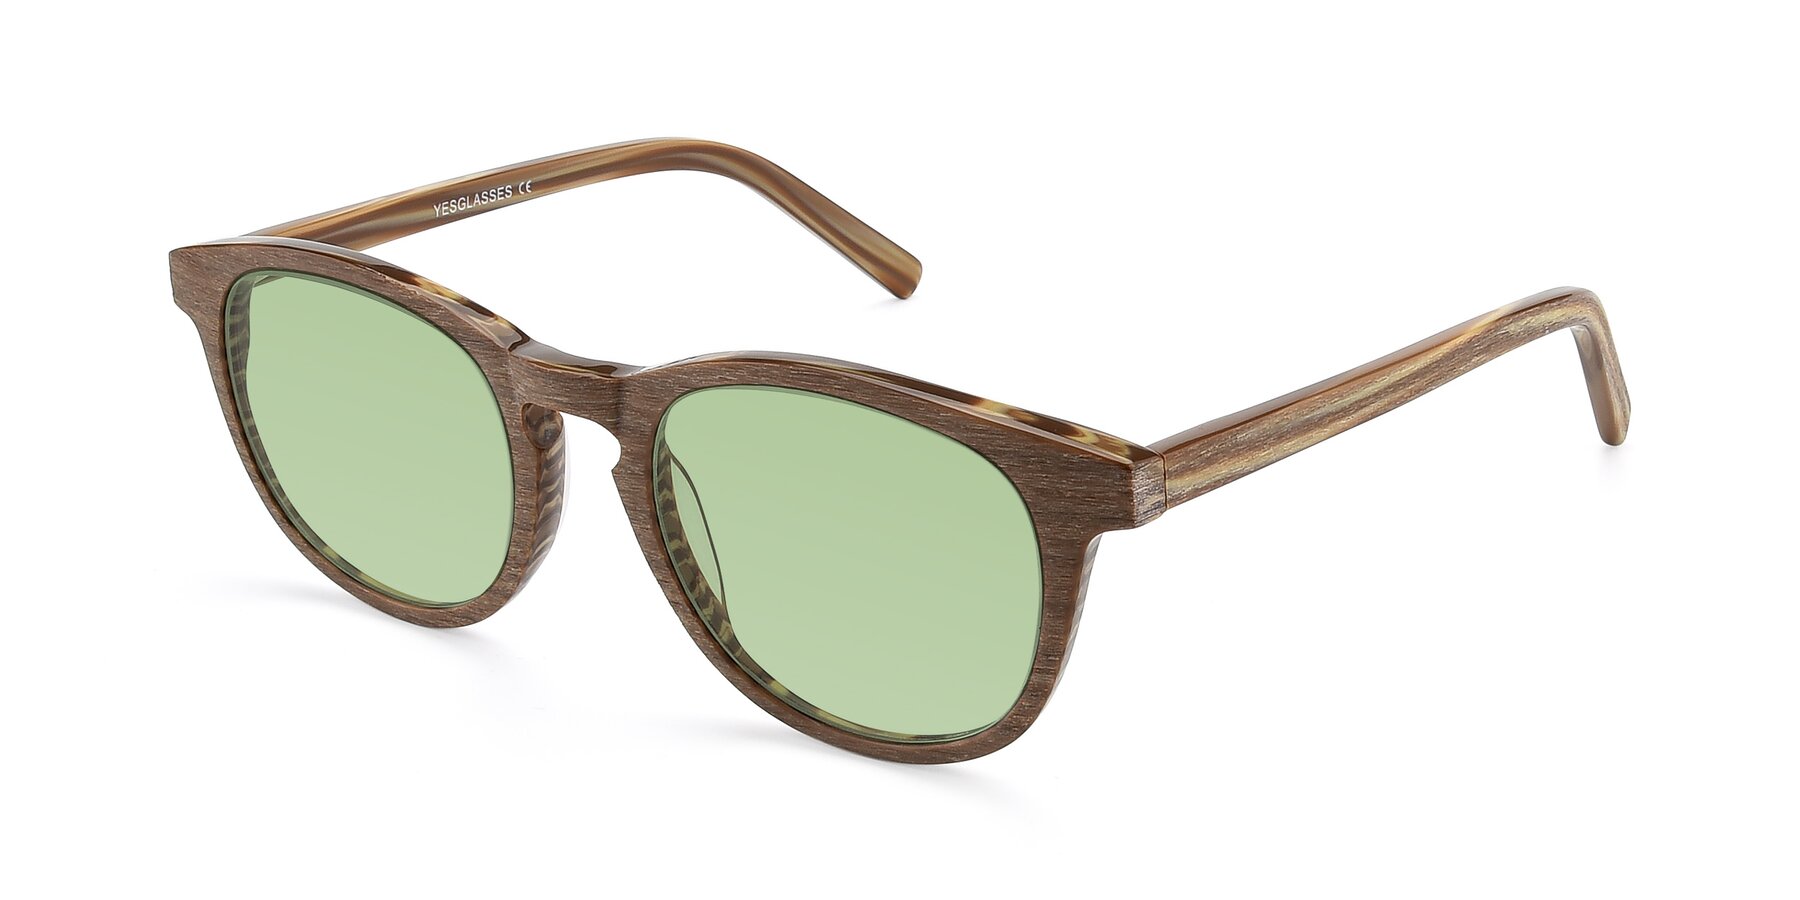 Angle of SR6044 in Brown-Wooden with Medium Green Tinted Lenses